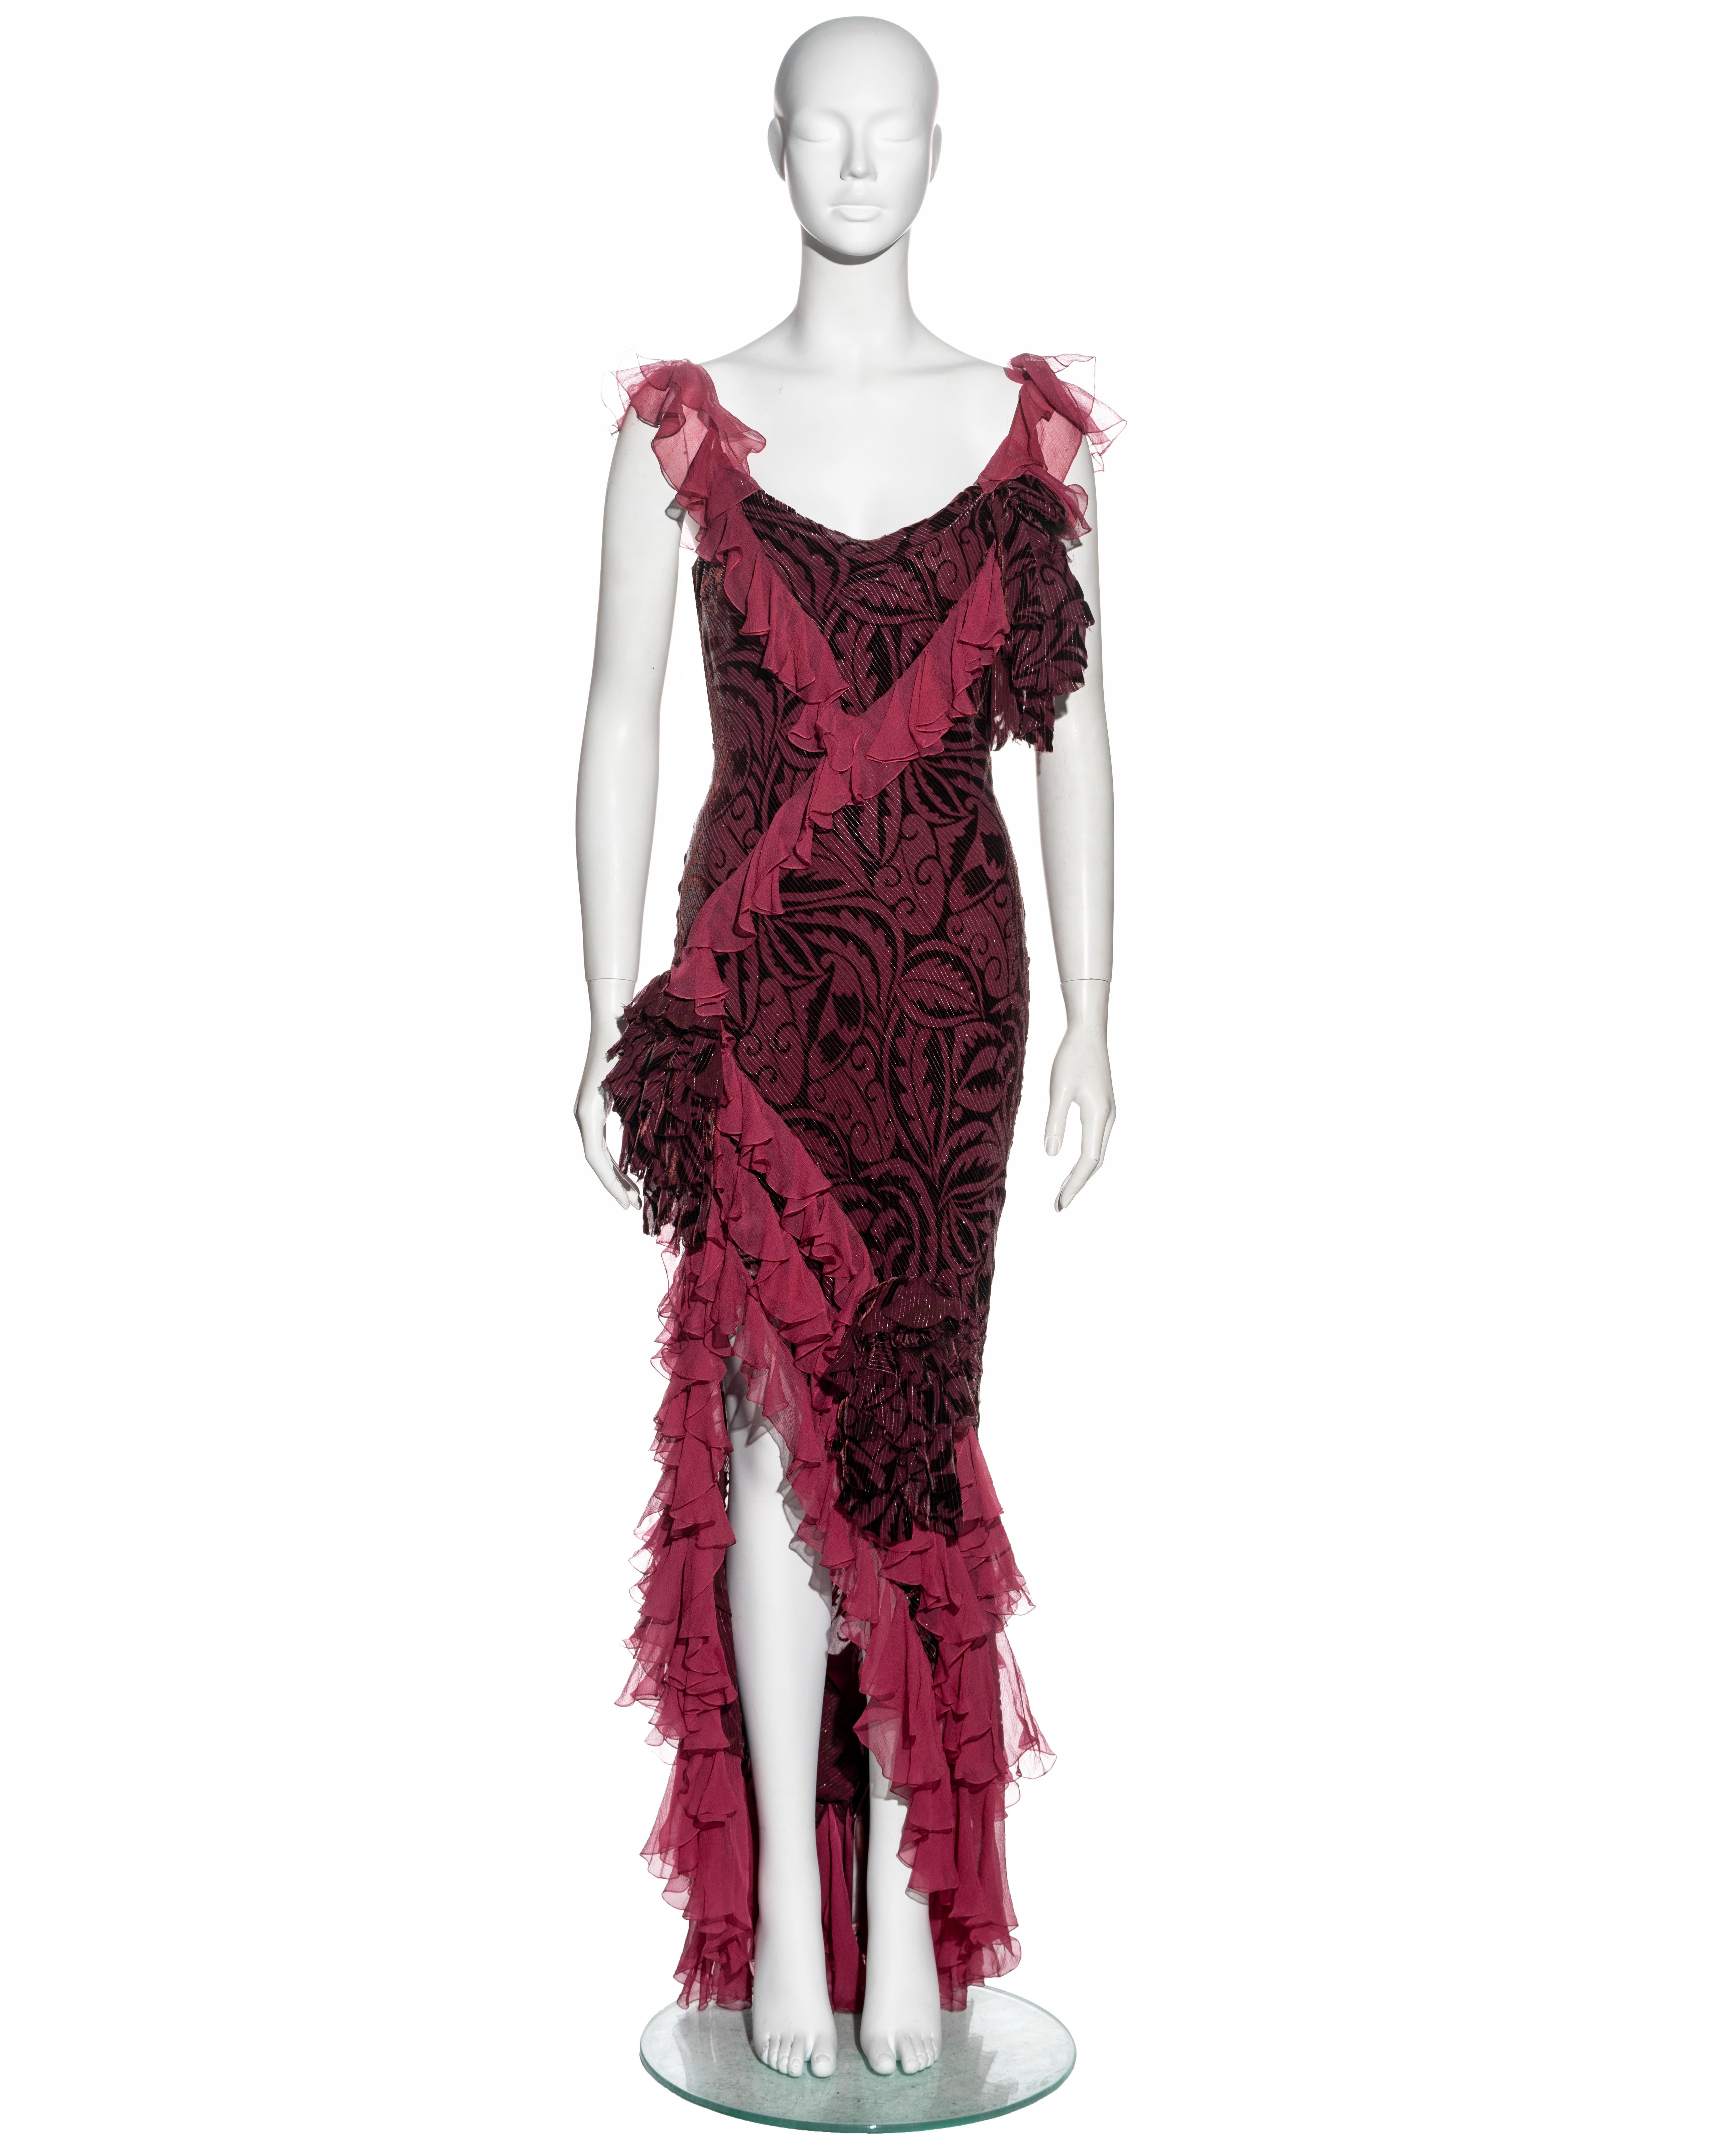 ▪ John Galliano evening dress
▪ Sold by One of a Kind Archive
▪ Constructed from bias-cut metallic plum and burgundy viscose-silk chiffon
▪ Ruffled trims and skirt 
▪ Chiffon and fur rosettes 
▪ Size FR 40 - US 12 - US 6
▪ Fall-Winter 2003
▪ Made in